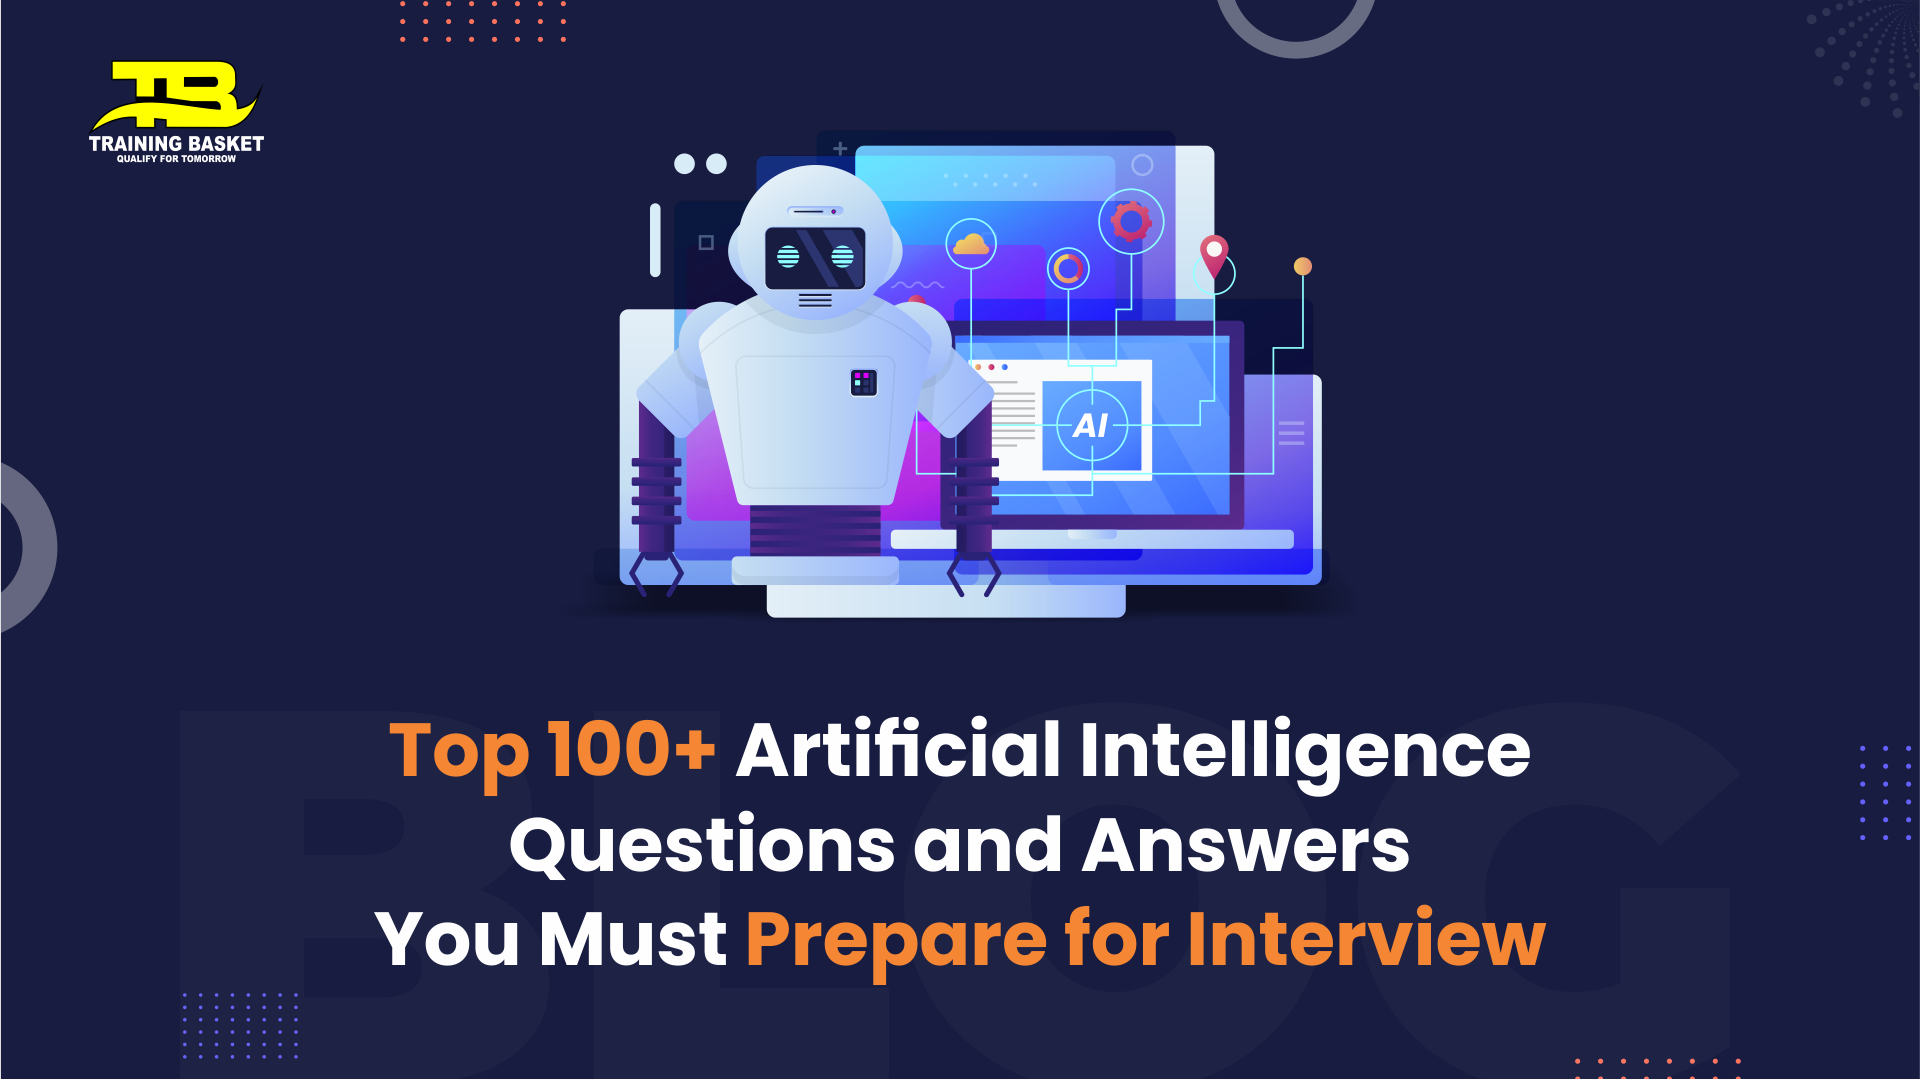 Top 100+ Artificial Intelligence
Questions and Answers
You Must Prepare for Interview